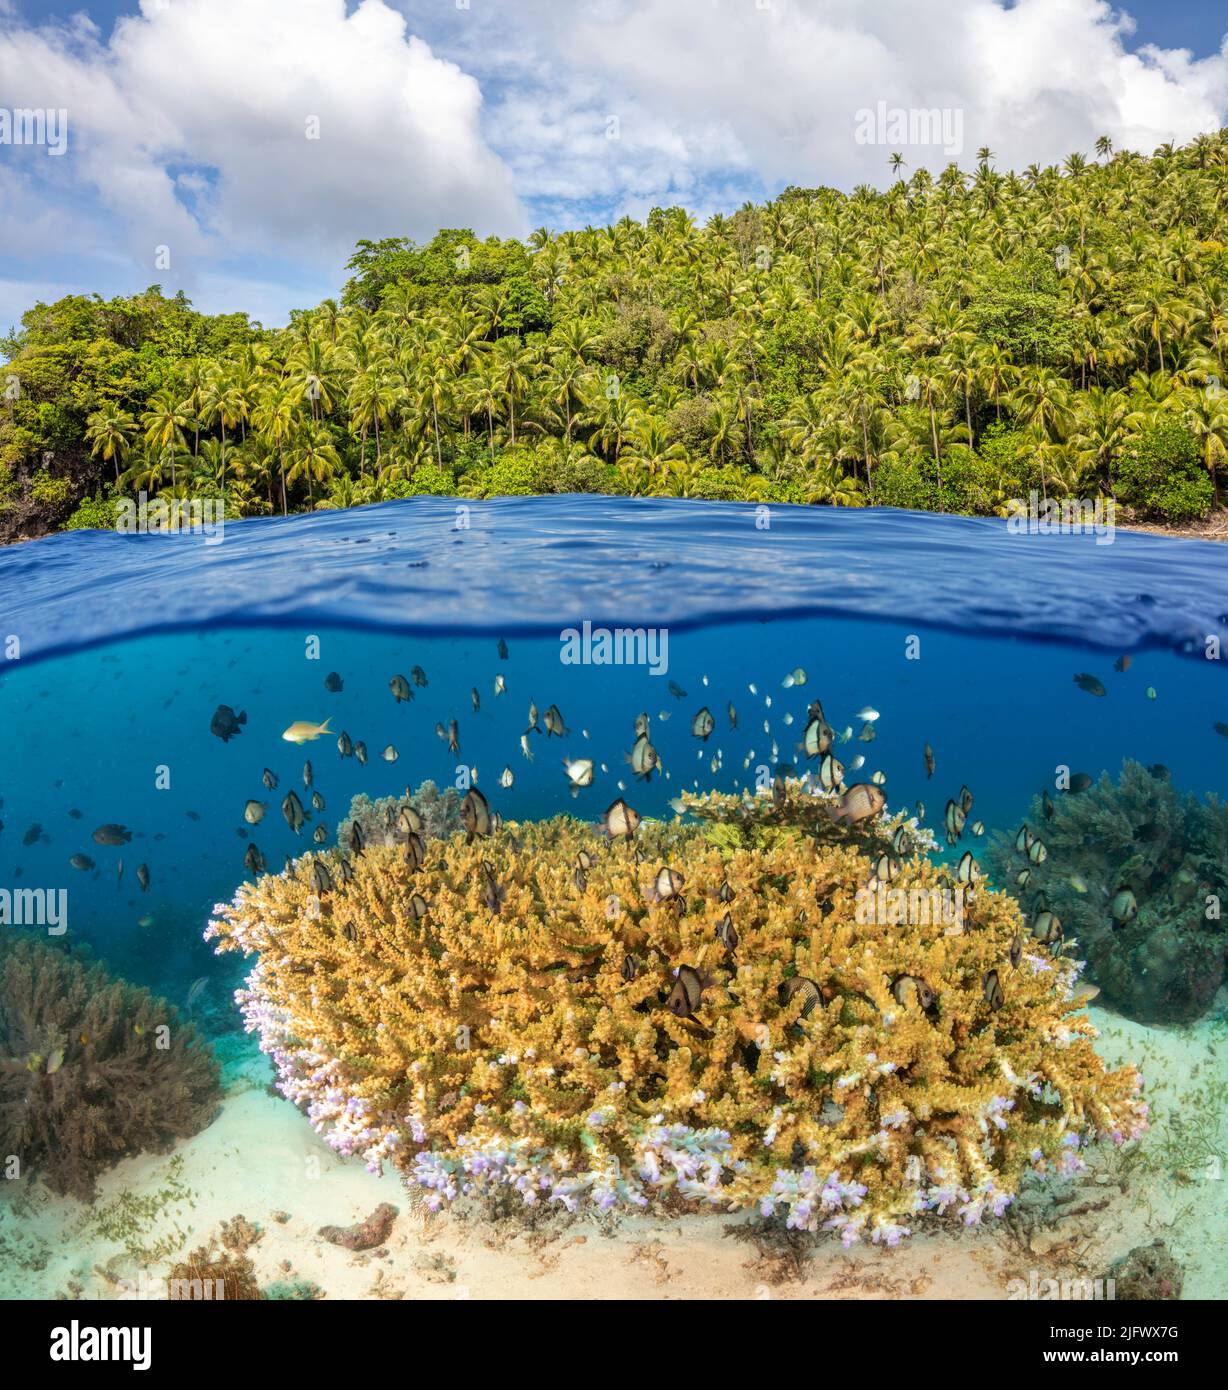 A split scene with a shallow hard coral reef and schooling fish below and a palm tree covered tropical island above, Philippines. Stock Photo